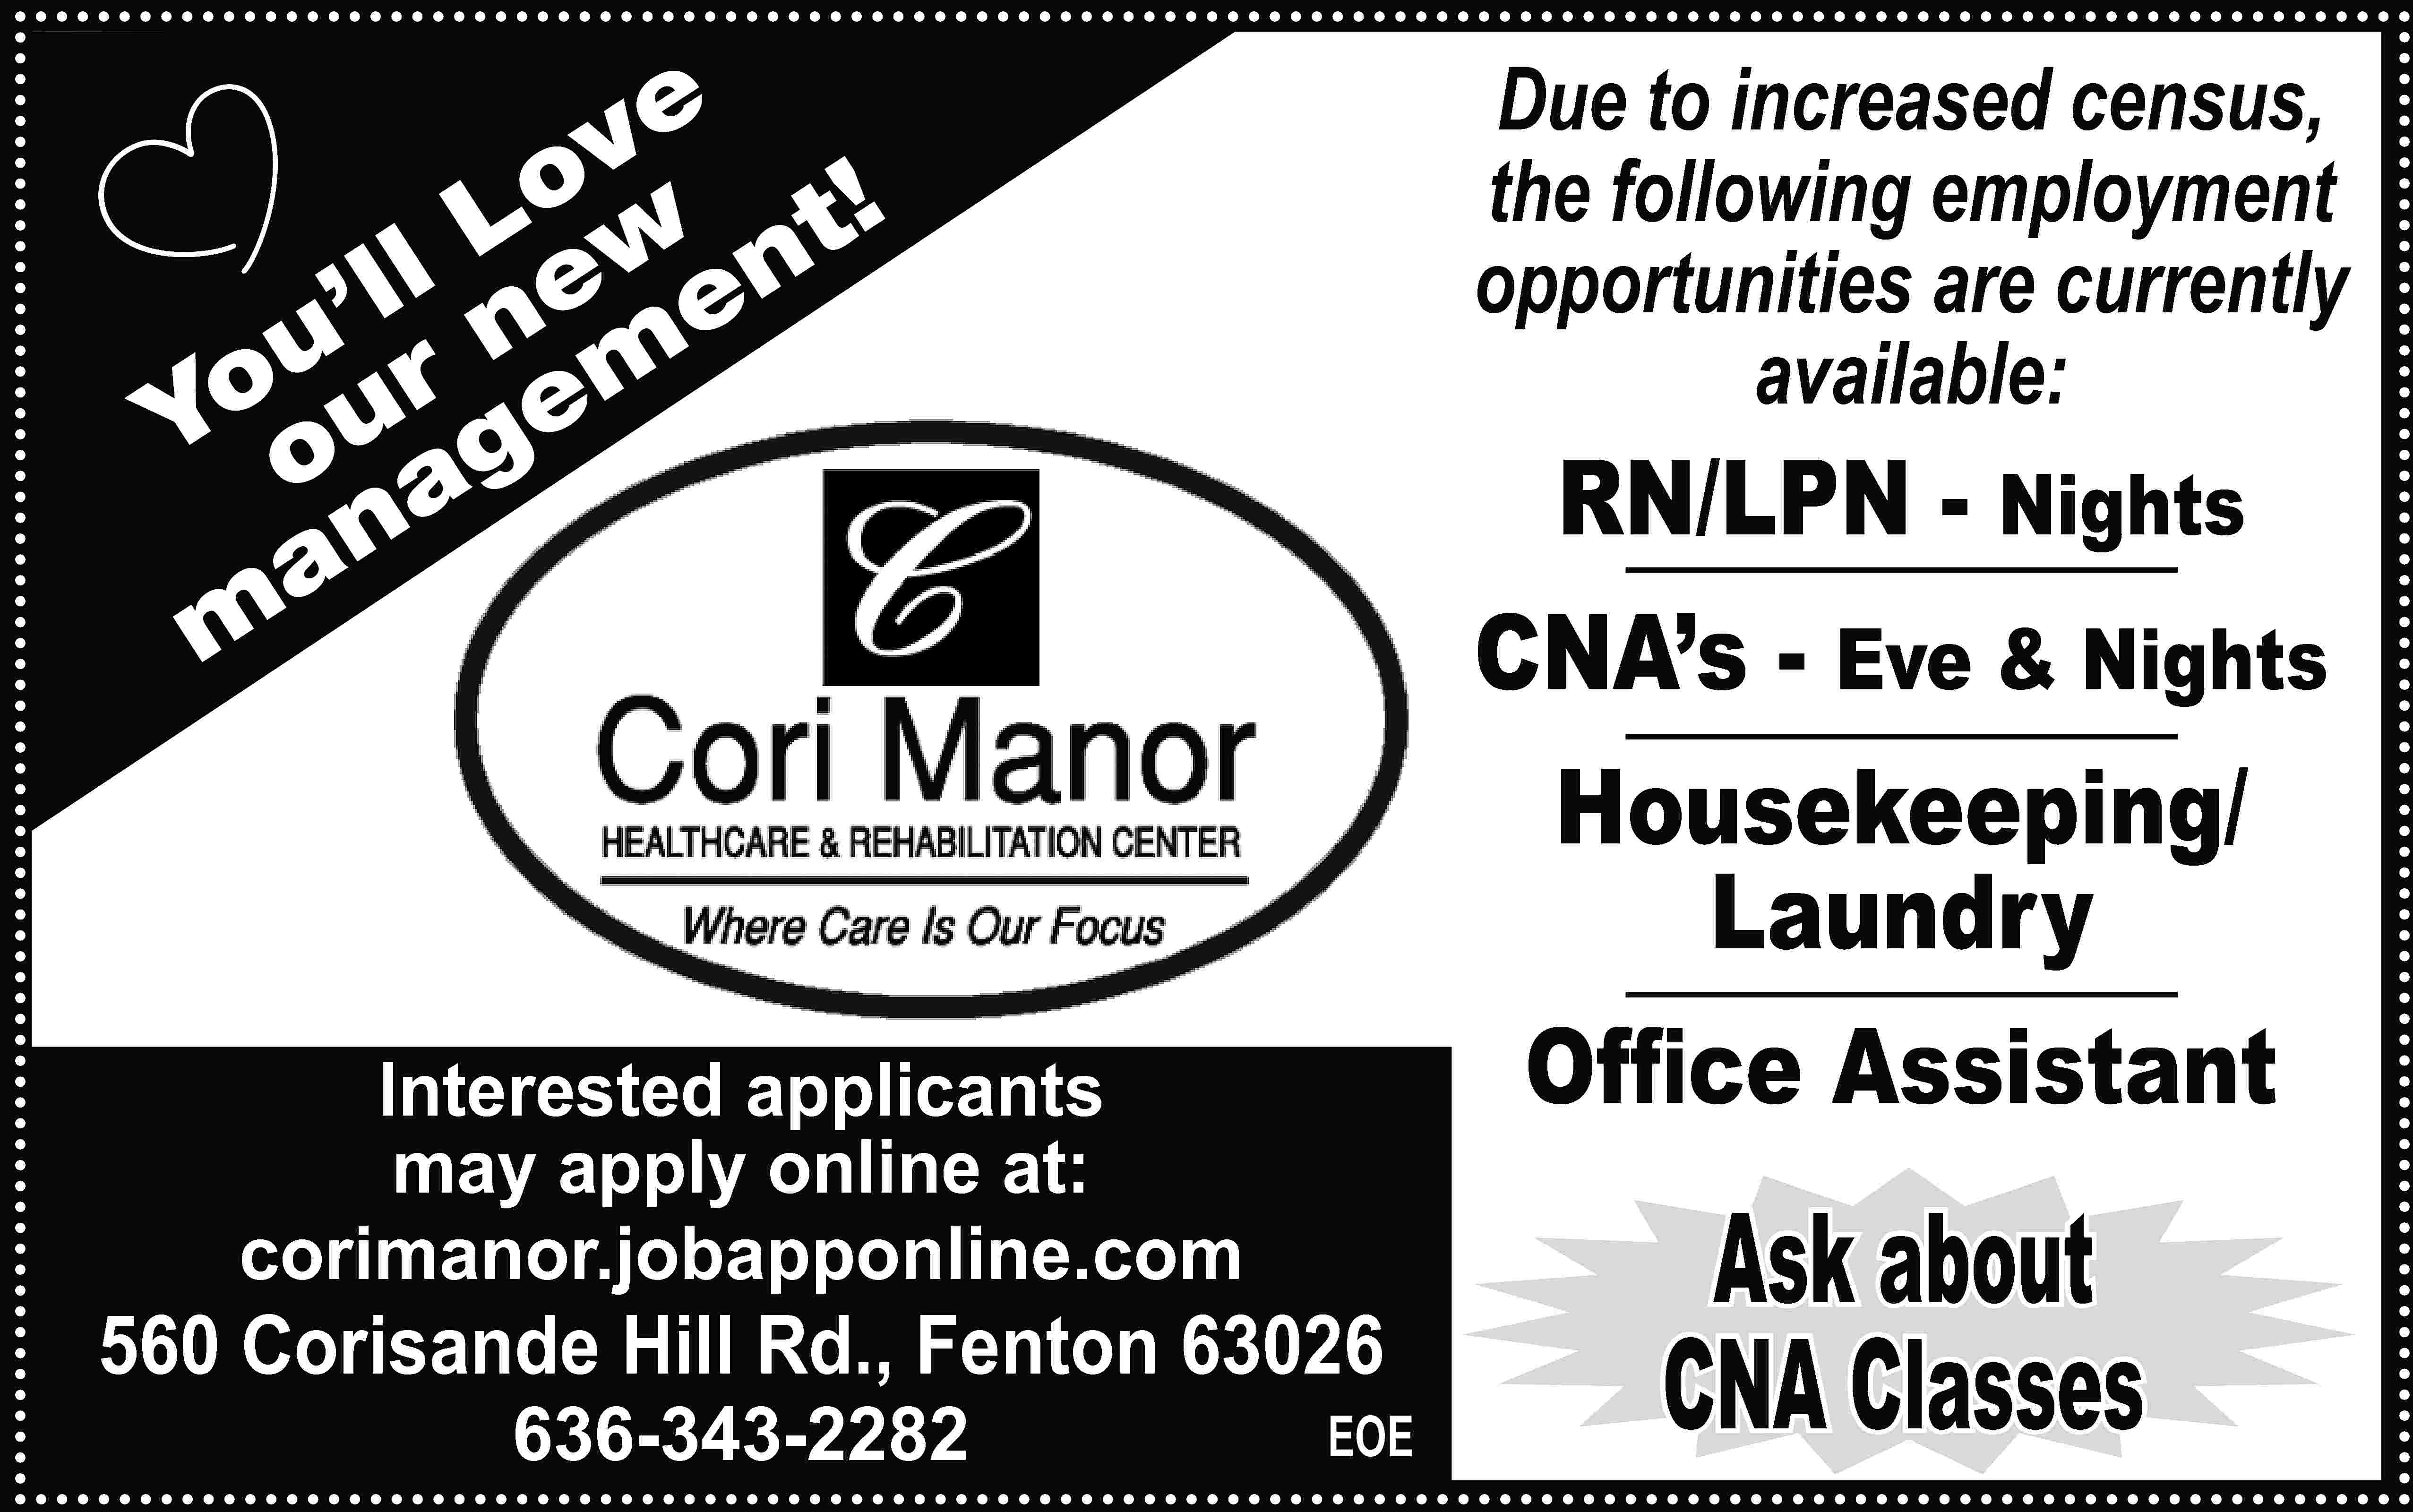 Due to increased census, the  Due to increased census, the following employment opportunities are currently available: e ov L t! w ll ne en ’ u m Yoour ge a an m o RN/LPN - Nights CNA’s - Eve & Nights Housekeeping/ Laundry Ofﬁce Assistant Interested applicants may apply online at: corimanor.jobapponline.com 560 Corisande Hill Rd., Fenton 63026 636-343-2282 EOE Ask about CNA Classes